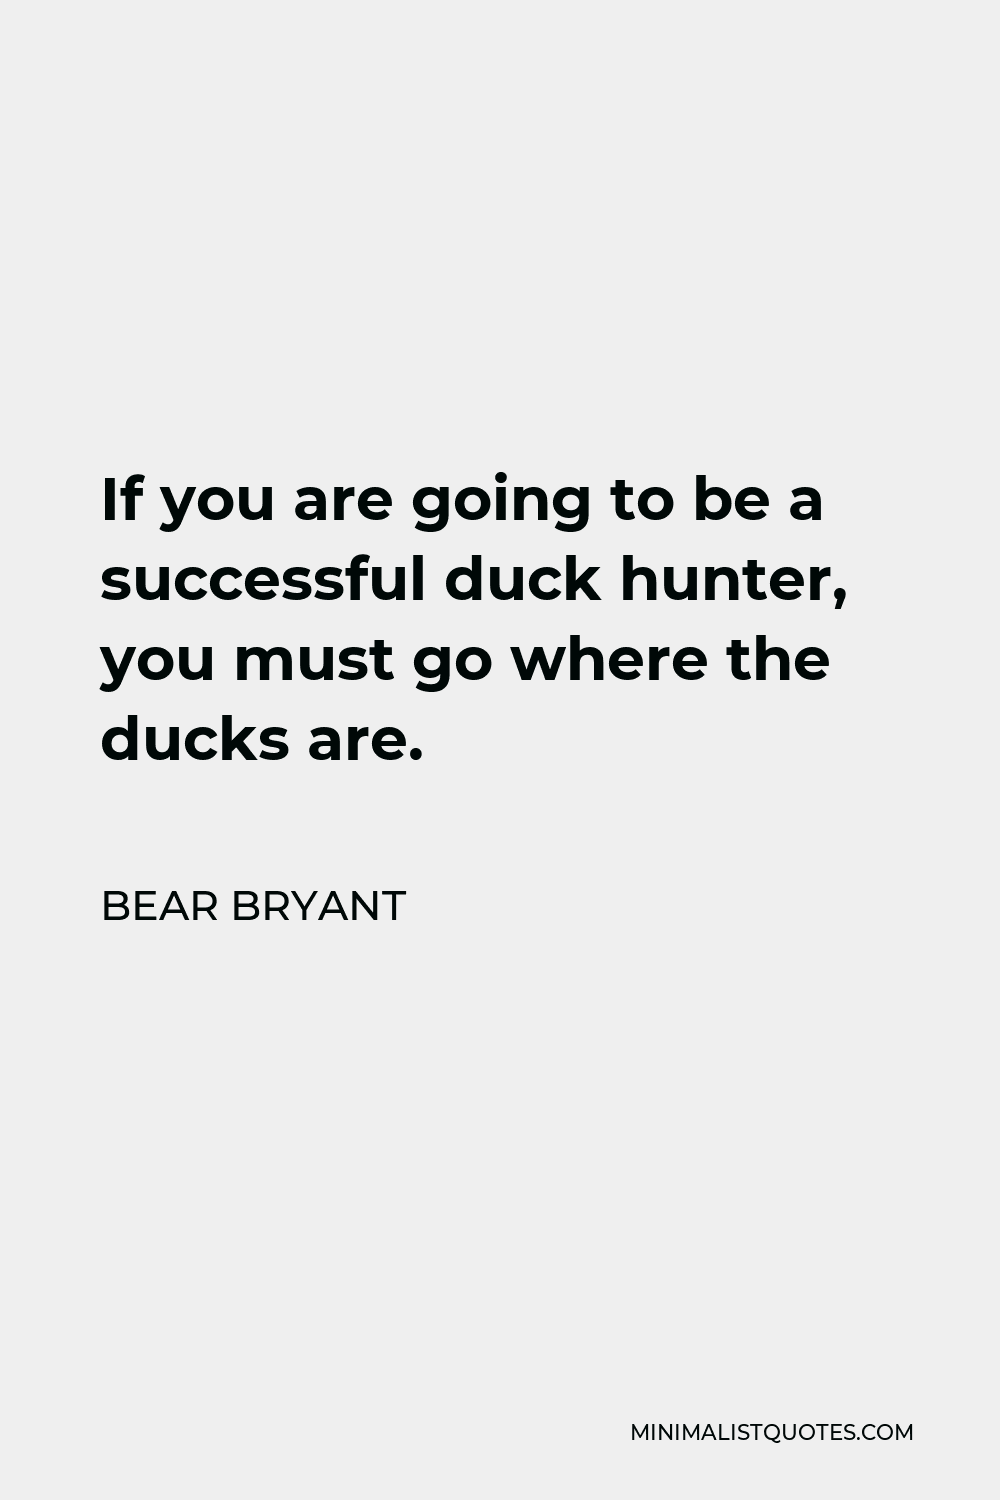 Bear Bryant Quote - If you are going to be a successful duck hunter, you must go where the ducks are.